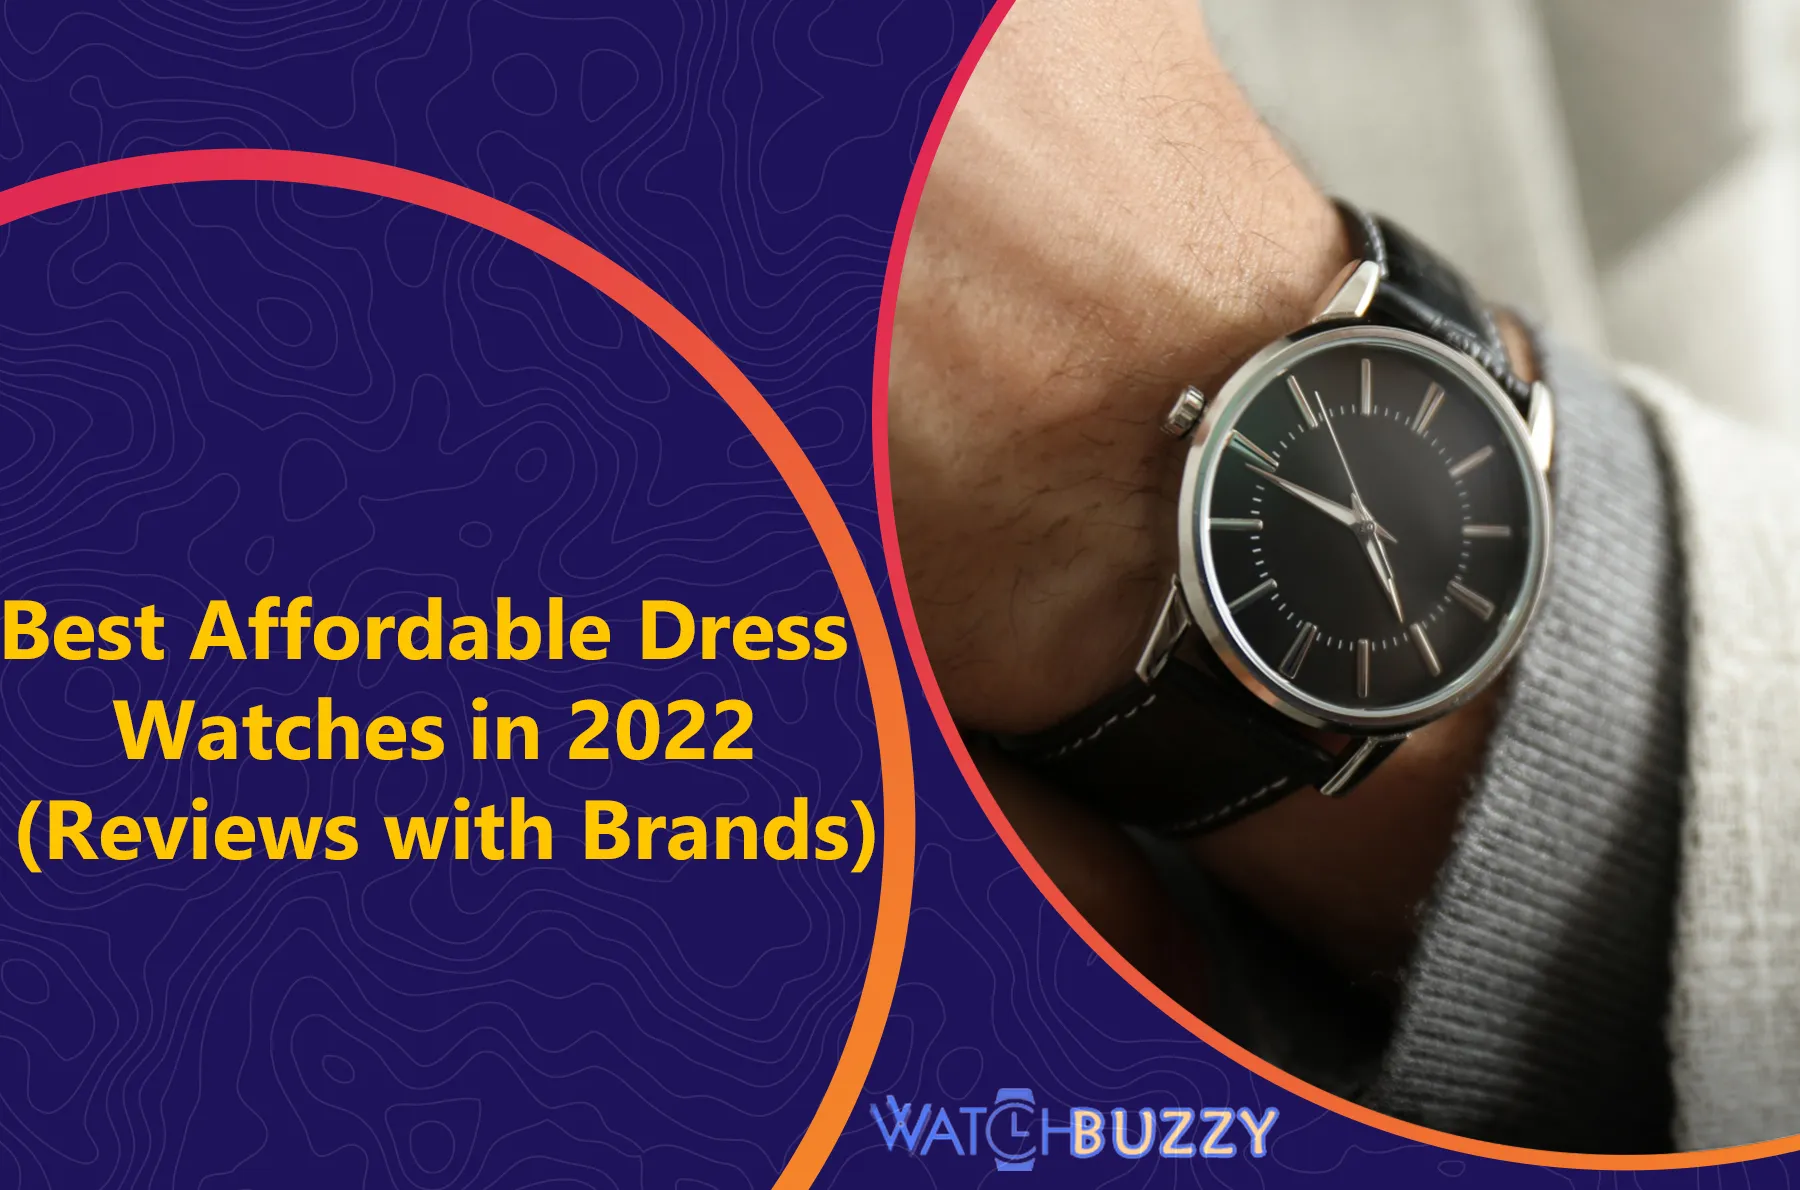 Best Affordable Dress Watches in 2022 (Reviews with Brands)